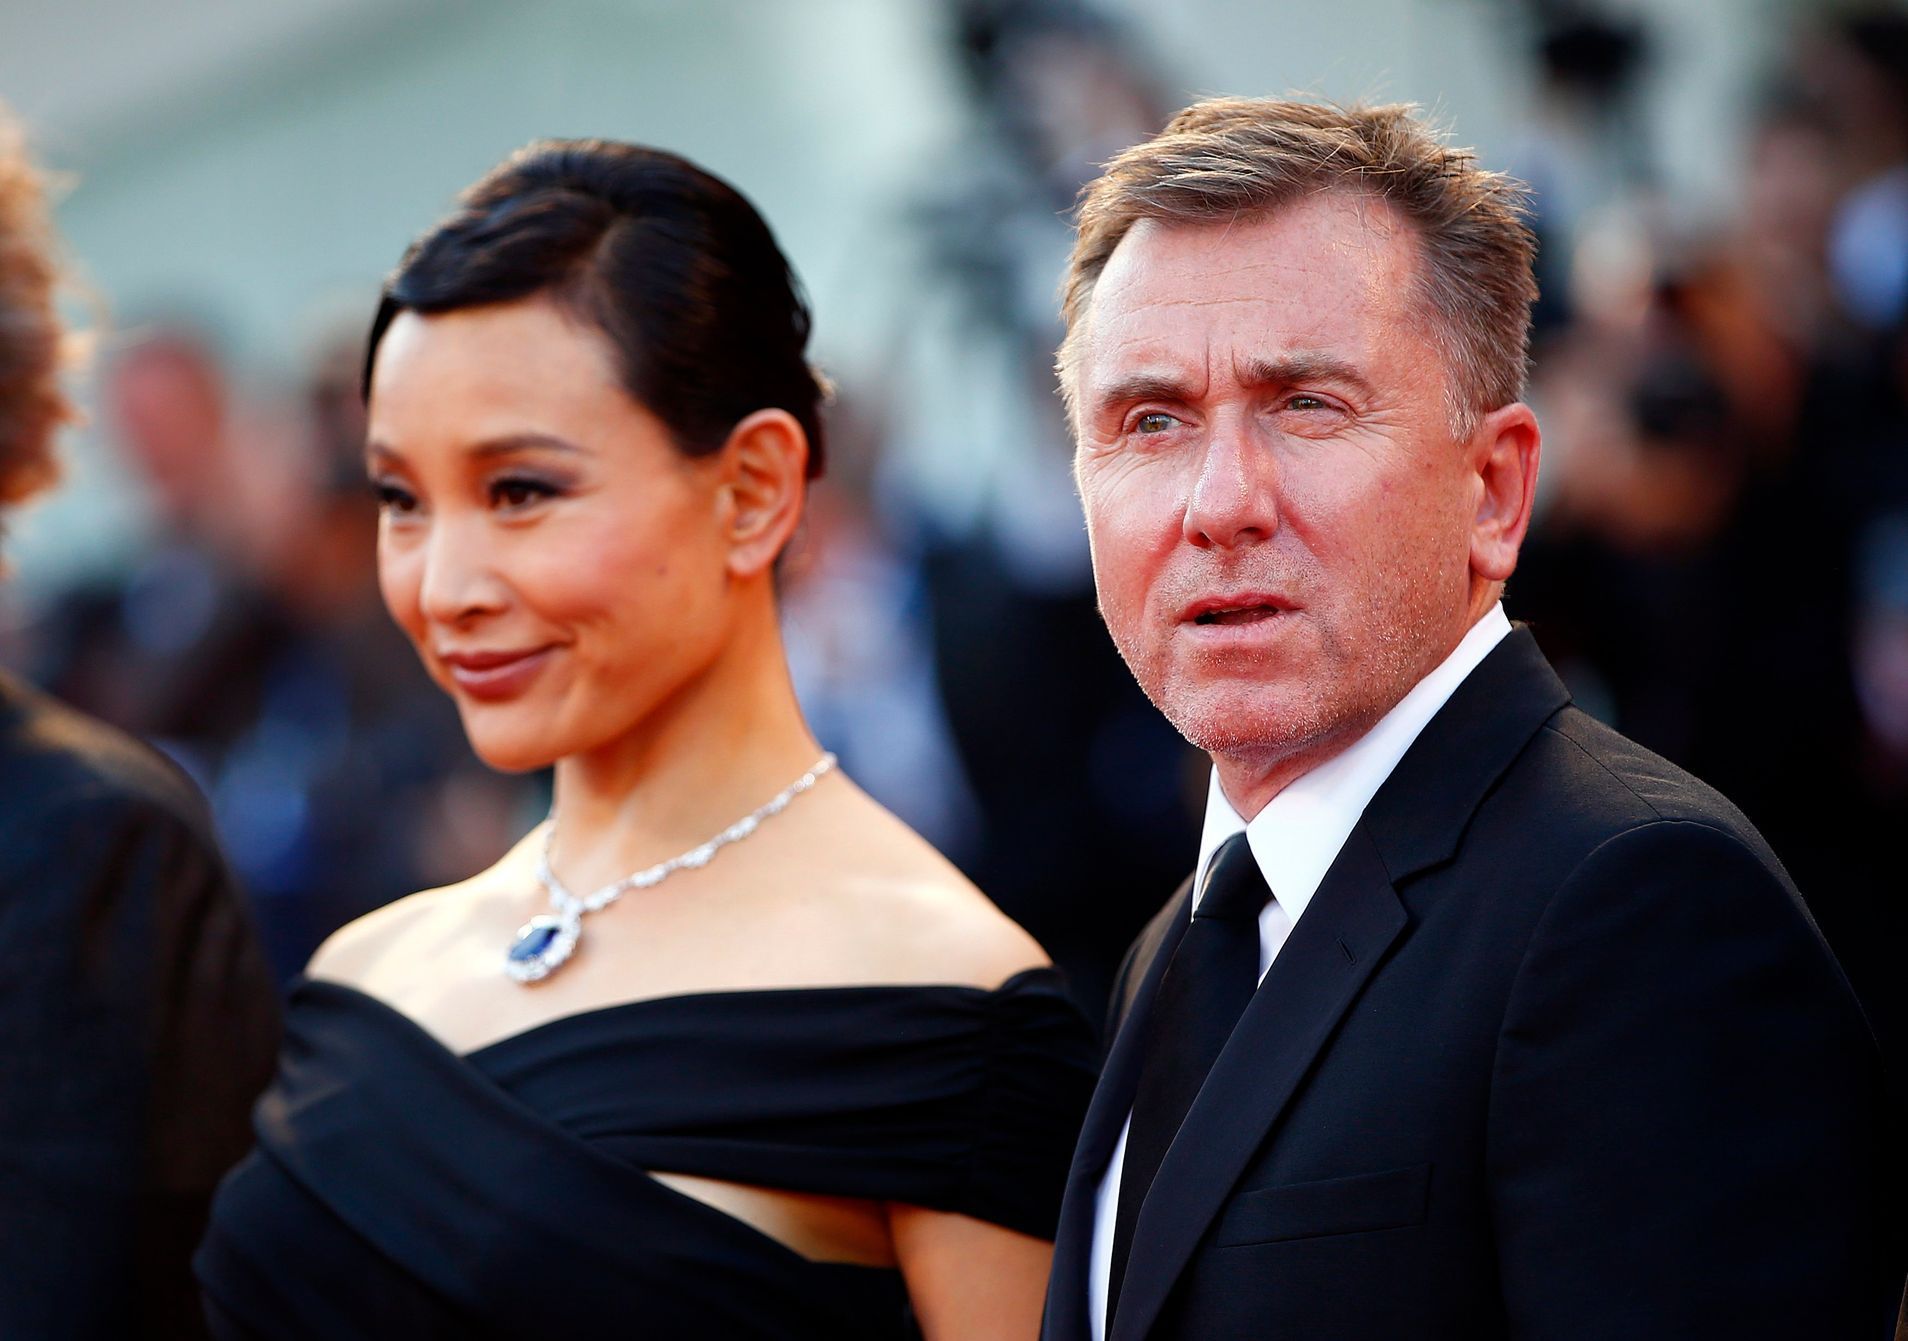 Actors Roth and Chen arrive on the red carpet for the opening ceremony of the 71st Venice Film Festival in Venice